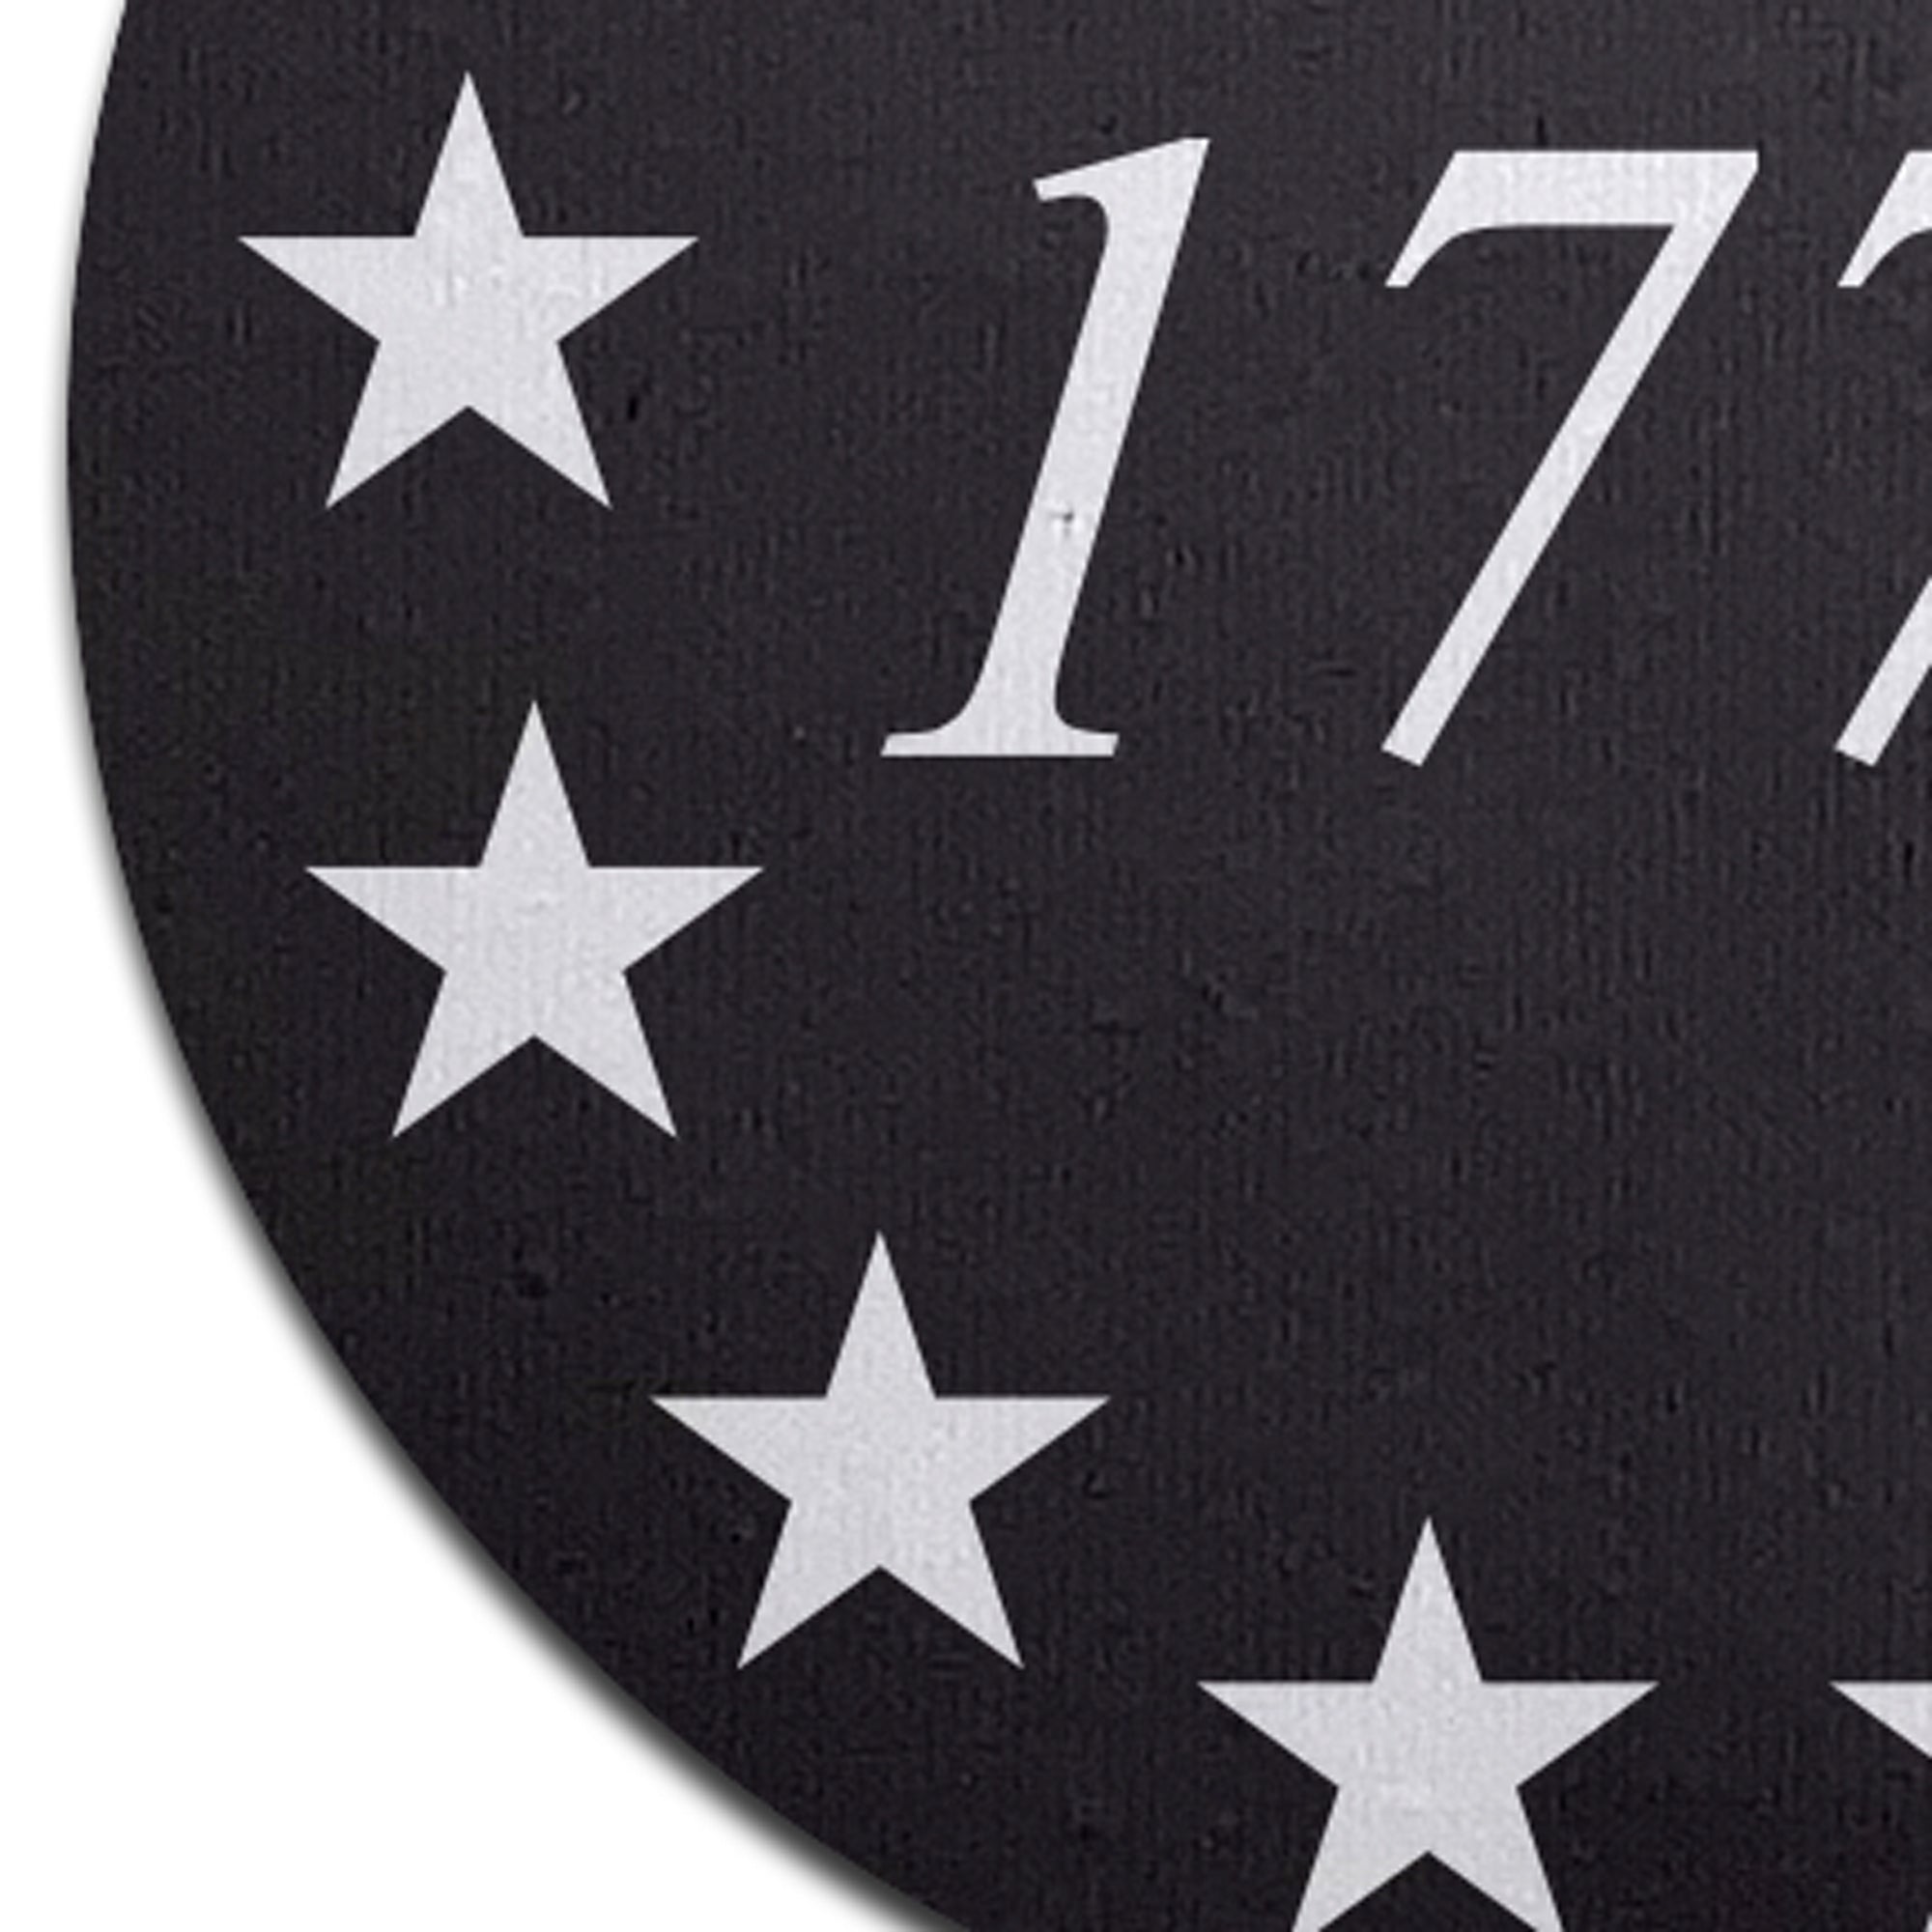 5-Pack: 1776 Star Spangled Black & White Nipple Pasties by Pastease